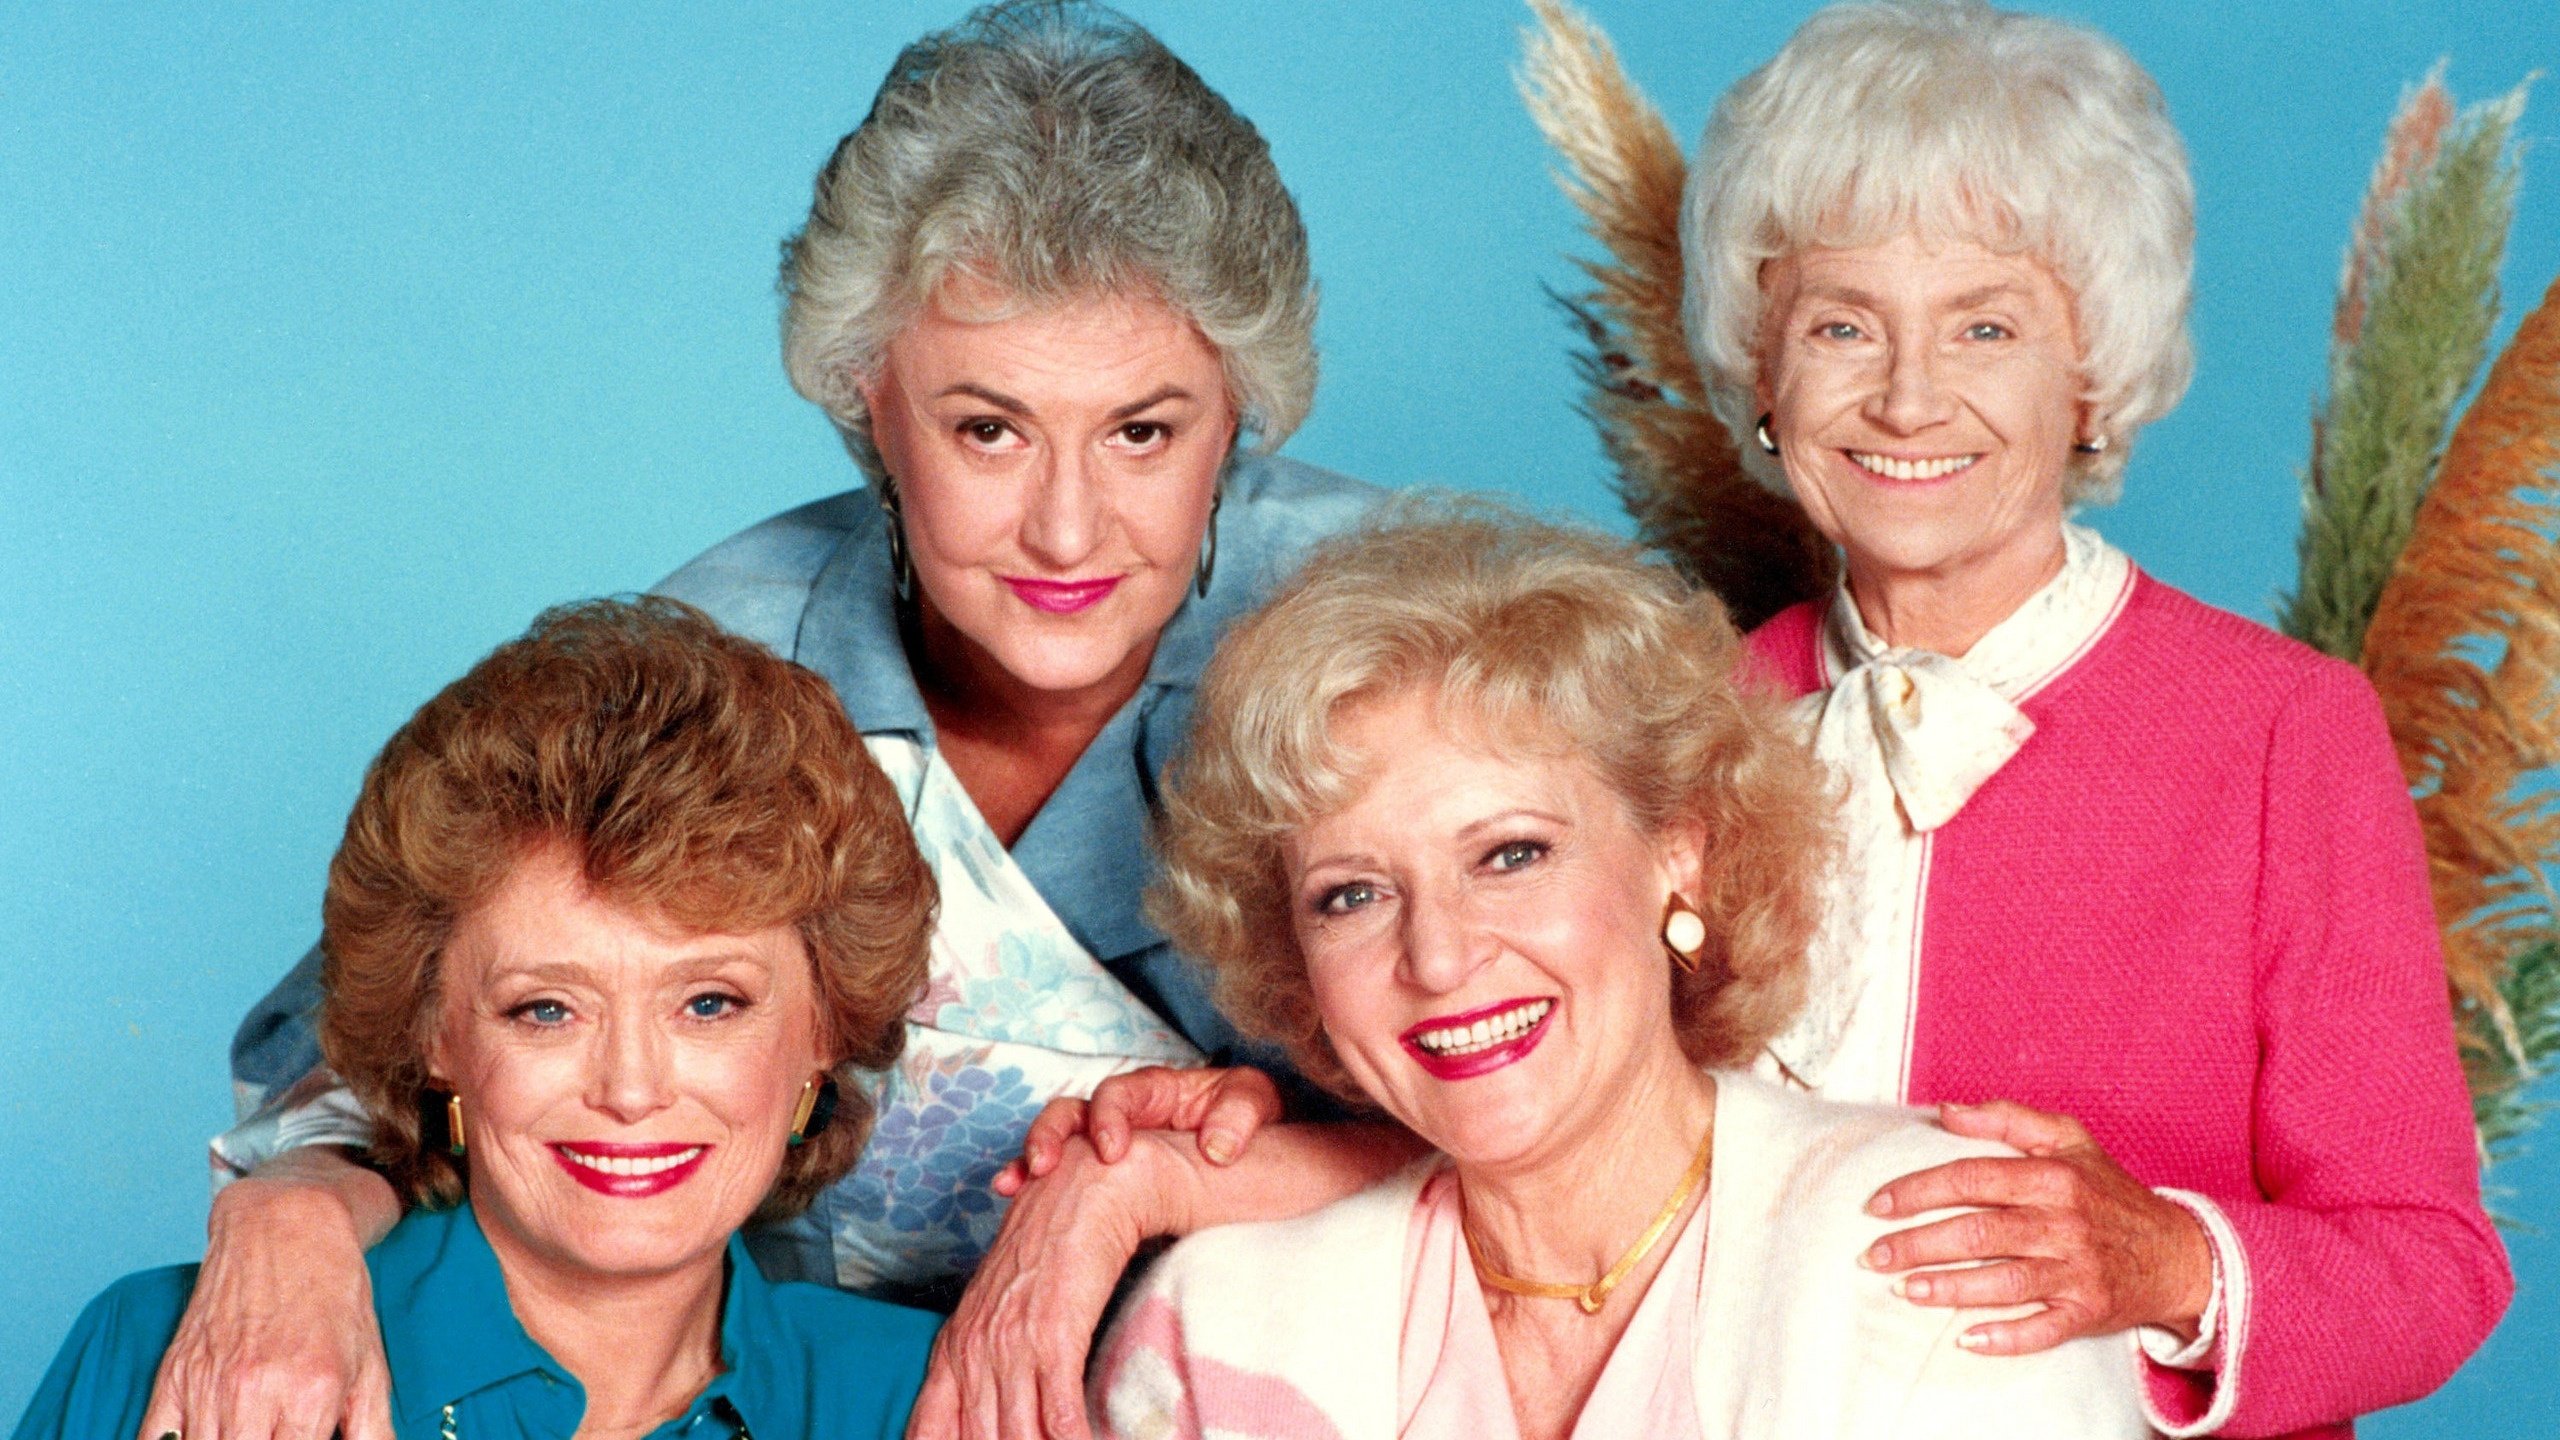 X-Tra reccomend golden girls this